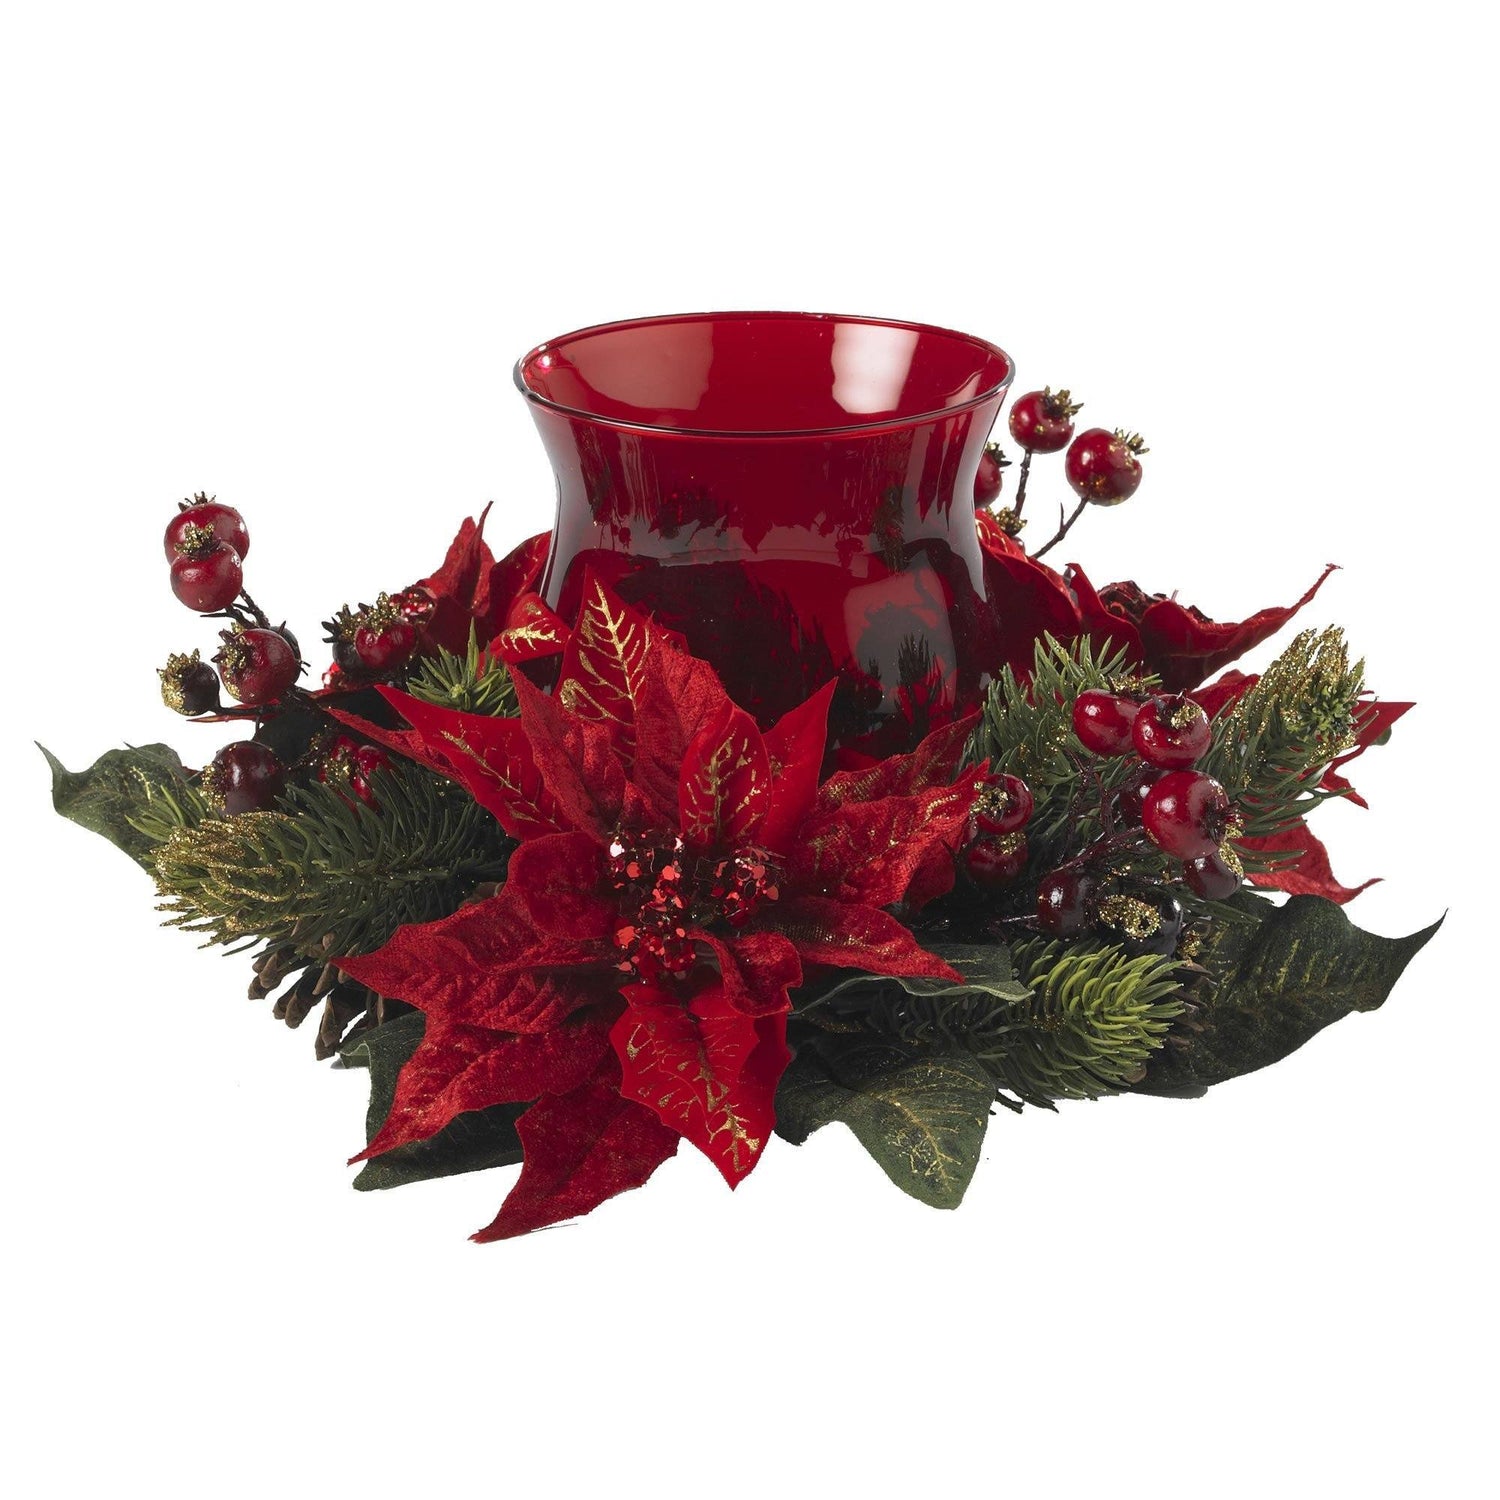 POINSETTIA Christmas Flowers Tarts Wax Melts, Bayberry Scent